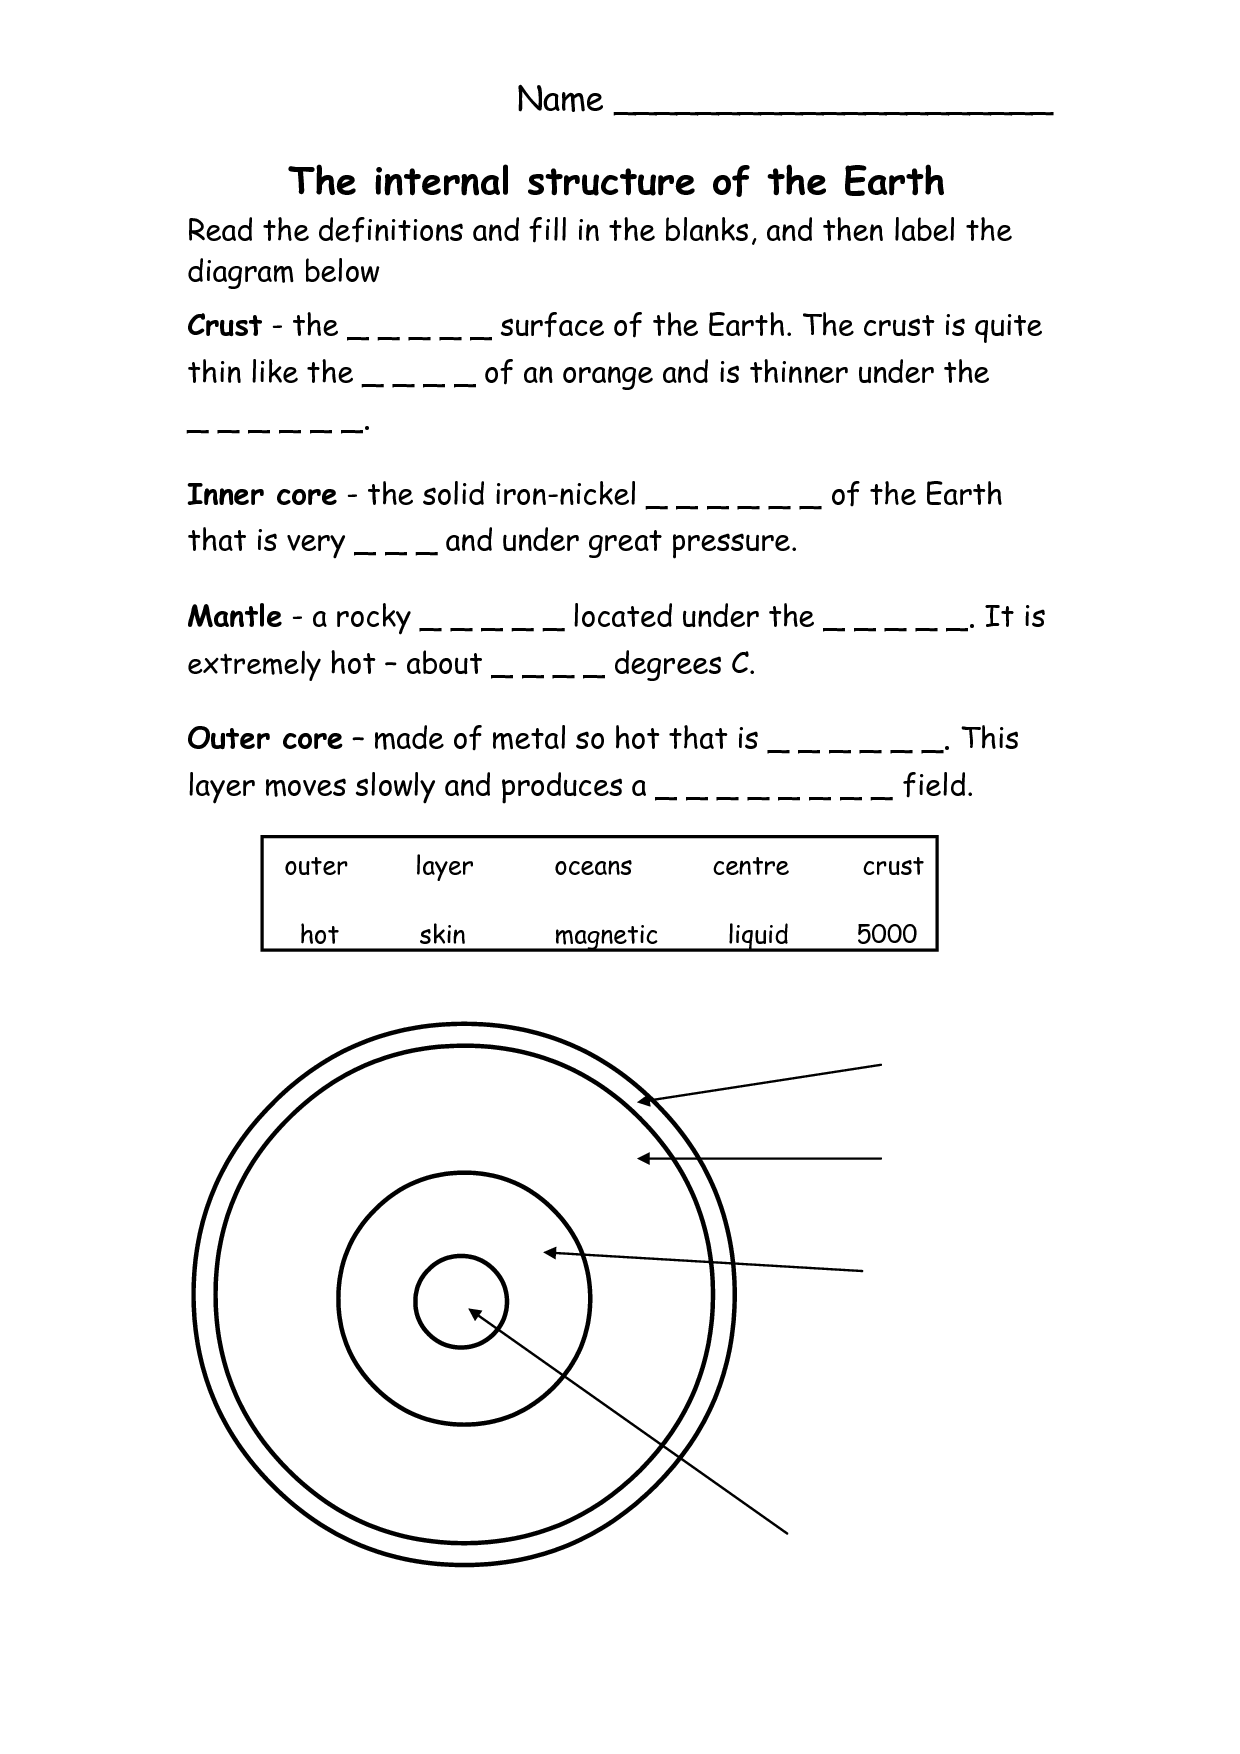 structure-of-the-earth-worksheet